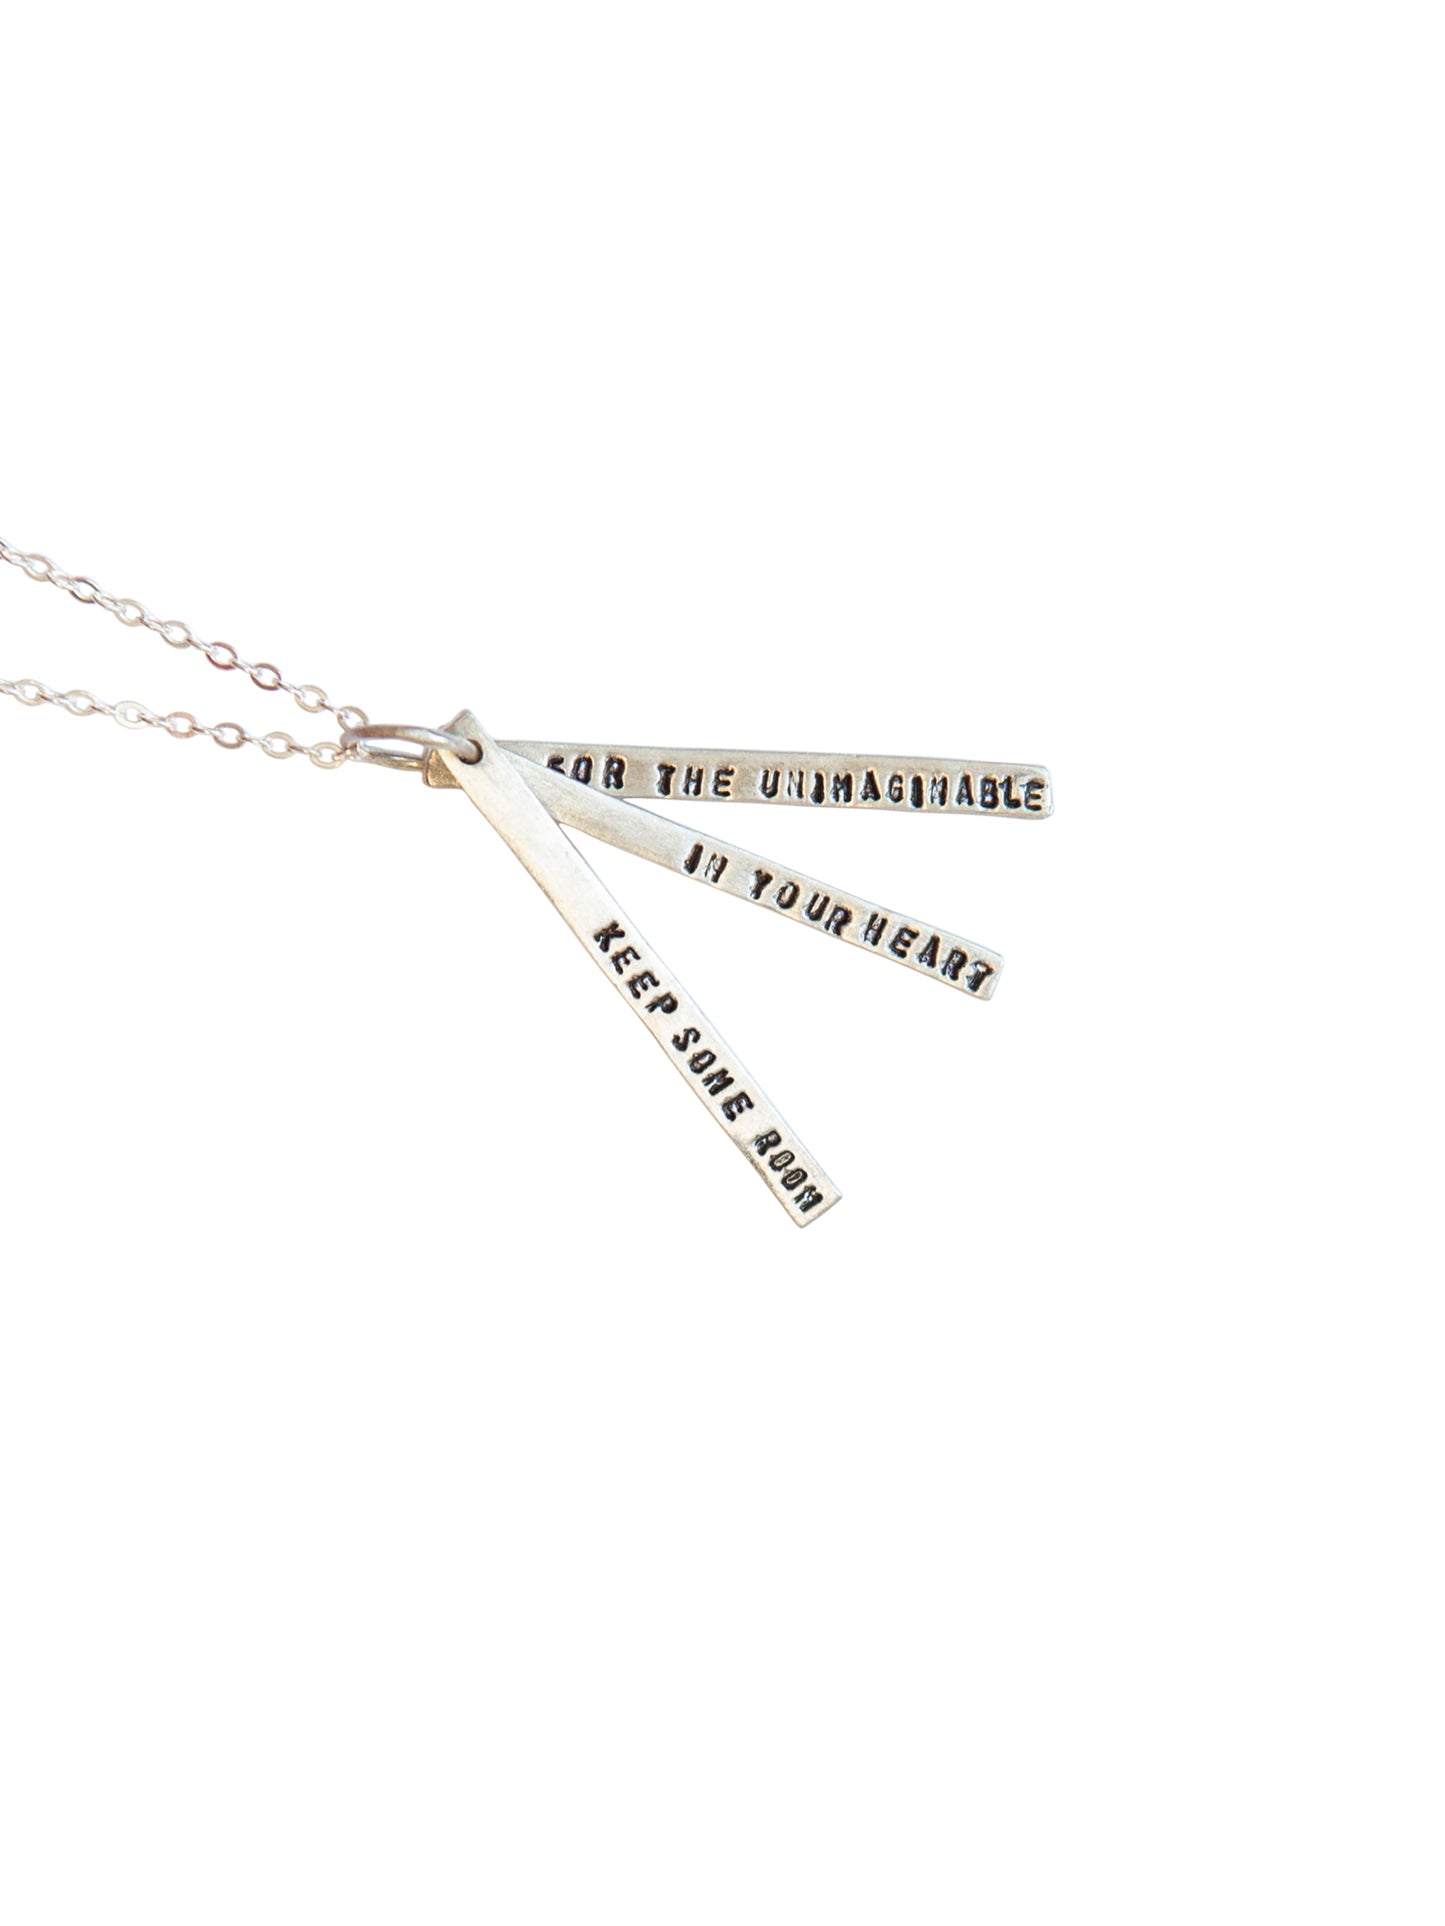 Chocolate & Steel Long-Bar Quote Necklace Mary Oliver Silver Weston Table